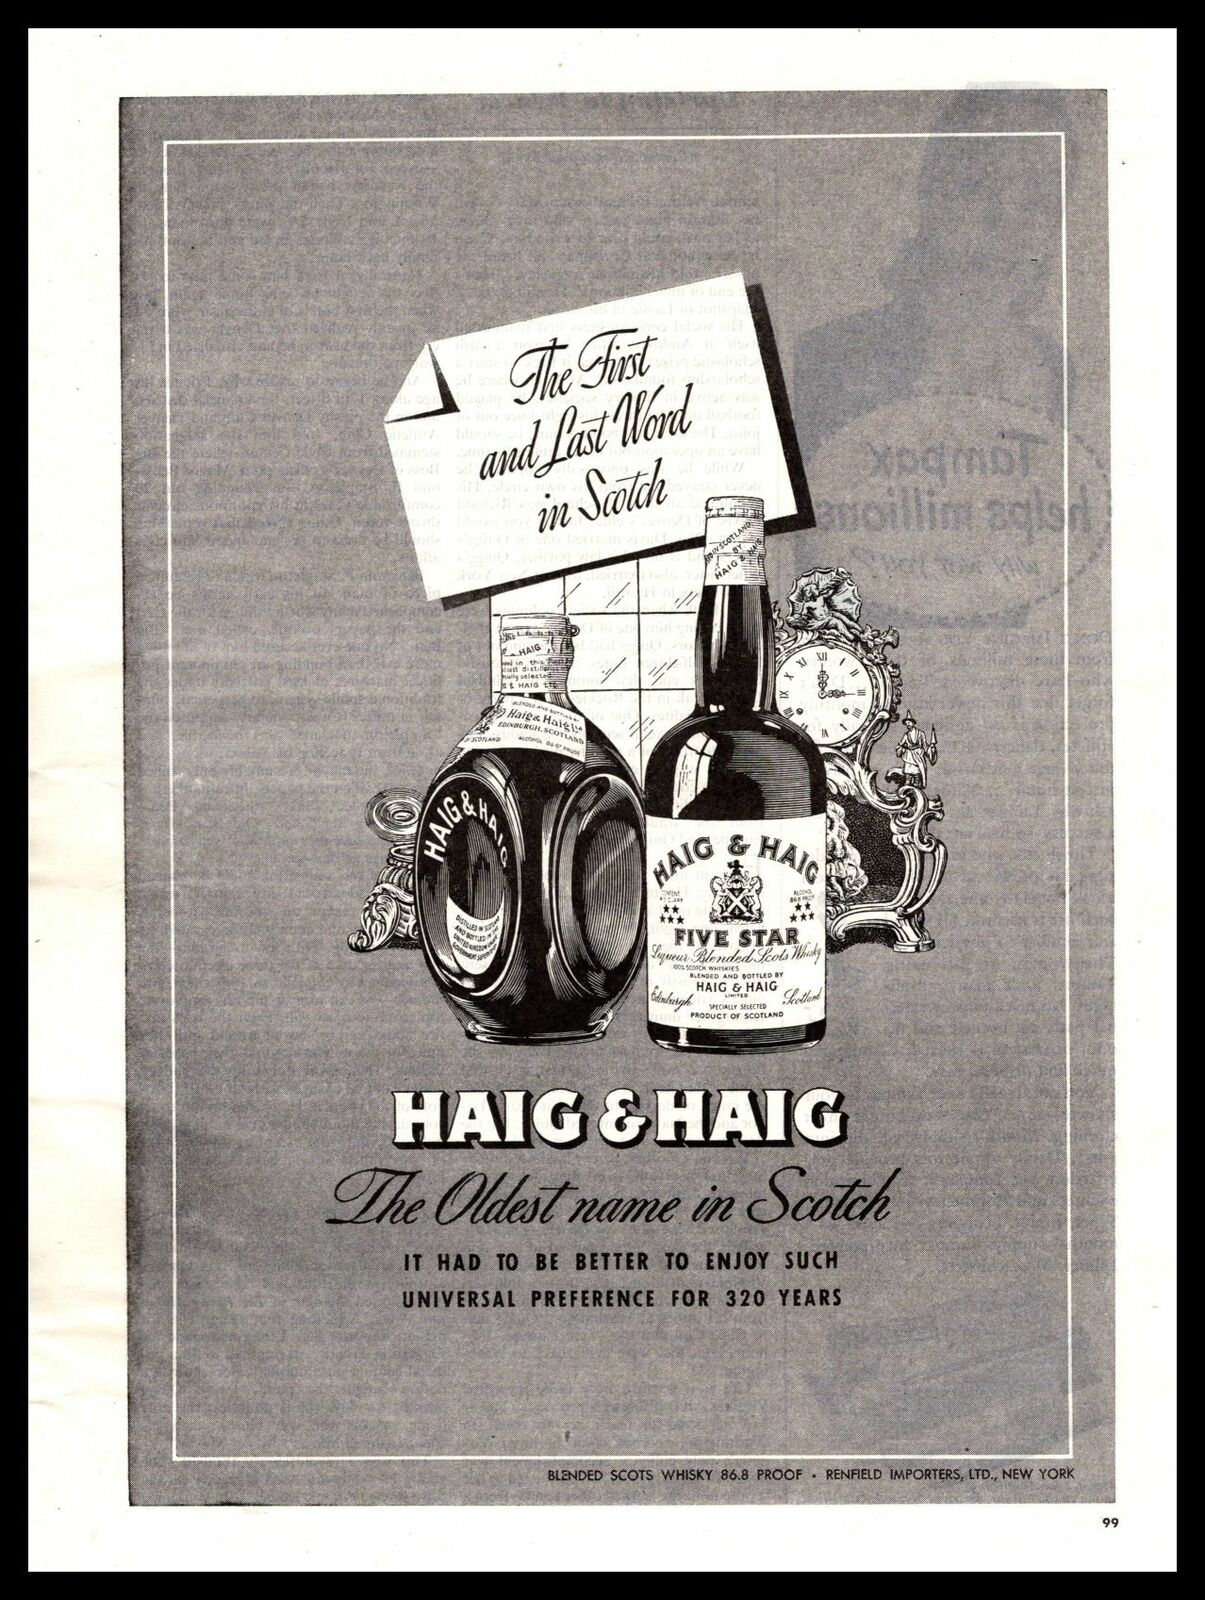 1947 Haig & Haig Five Star Scotch Whisky "it Had To Better" Vintage Print Ad